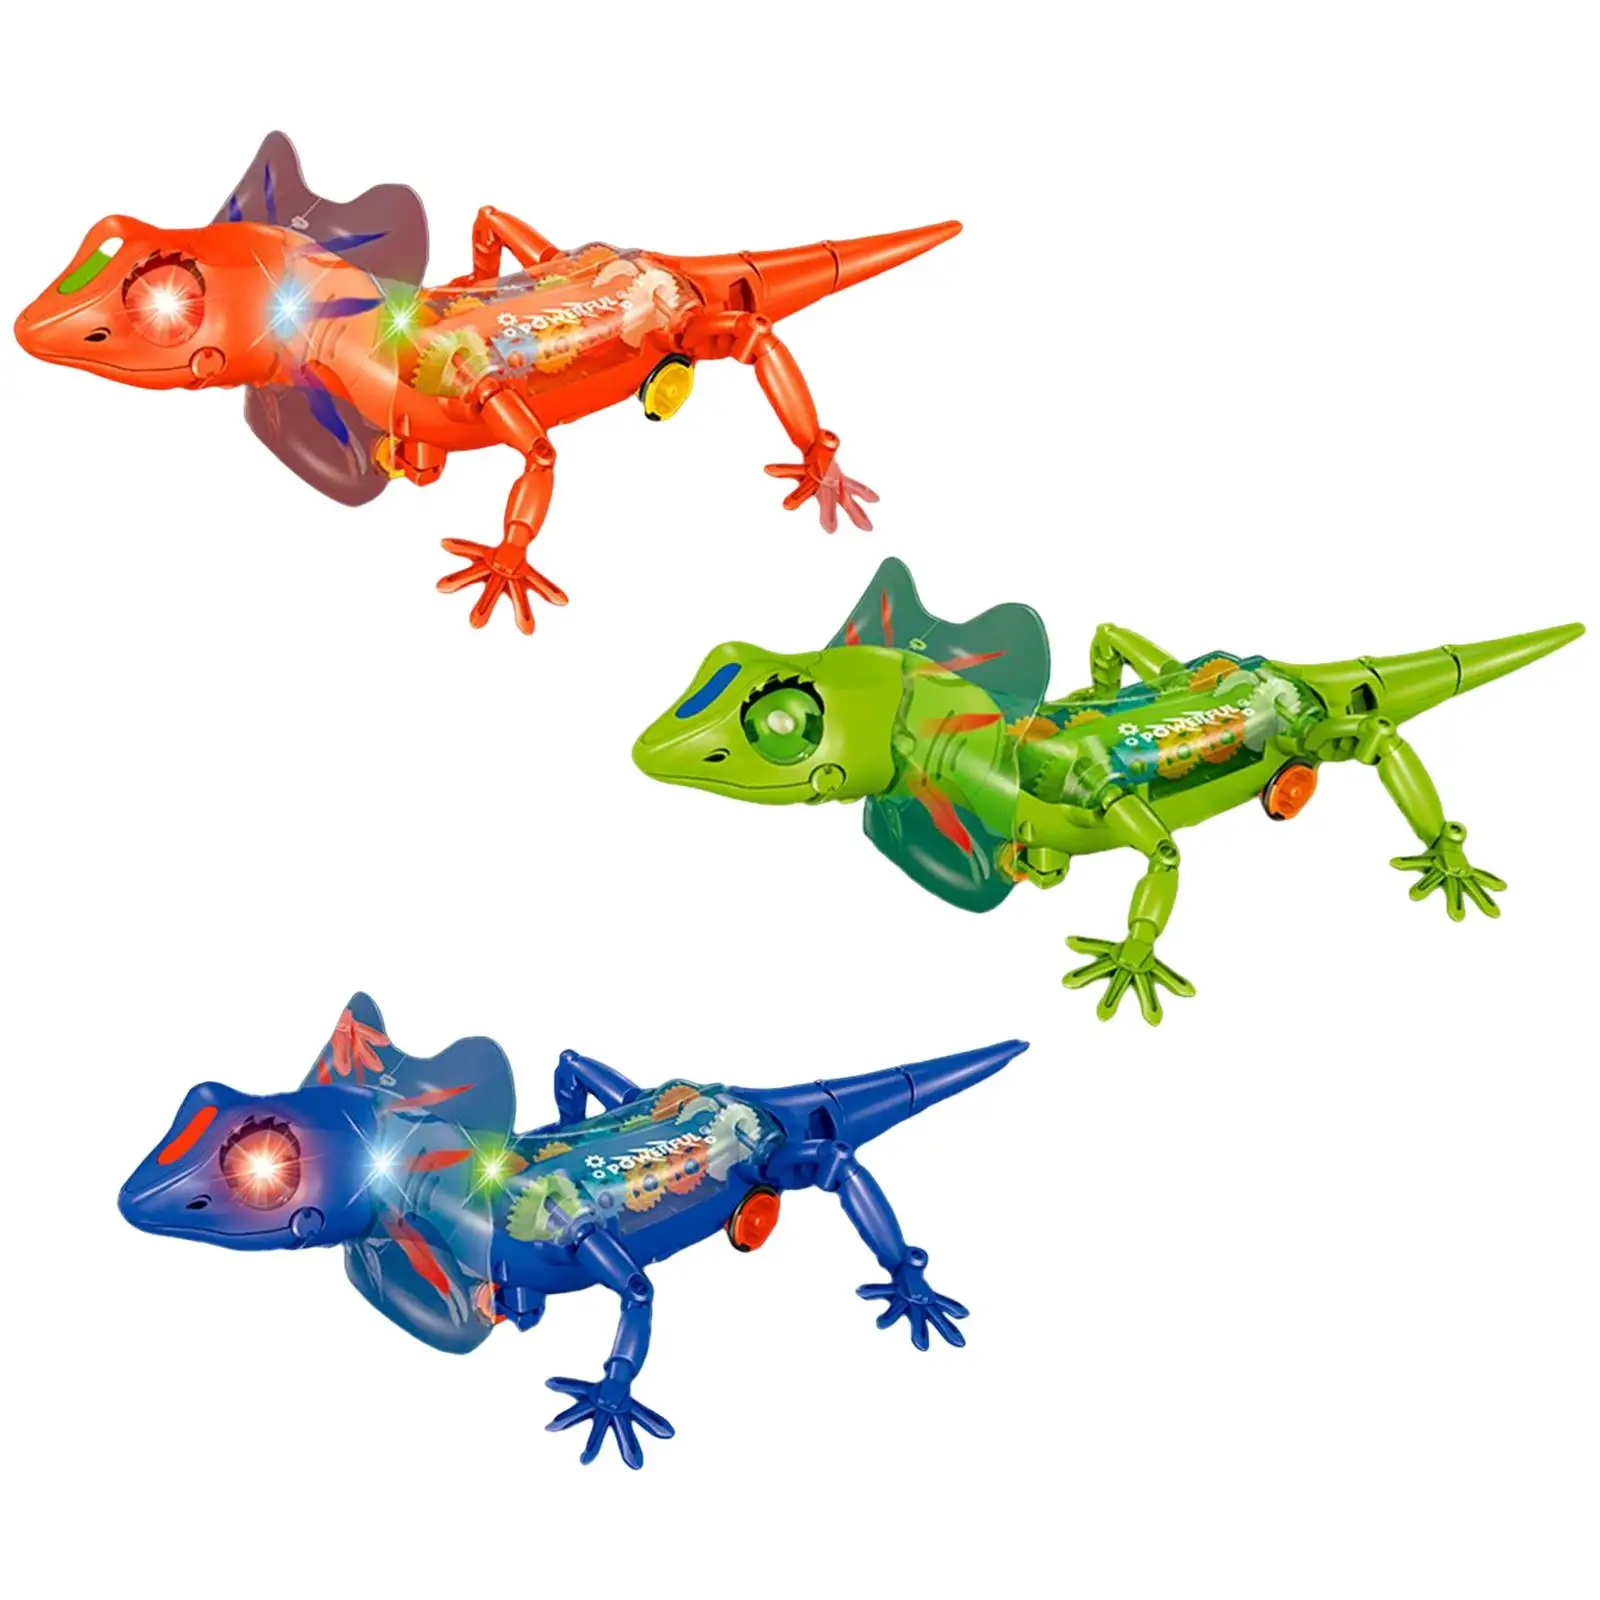 Lizard Battery Powered Robotic Toy Crawling Removable Tail Trick Toy Gift